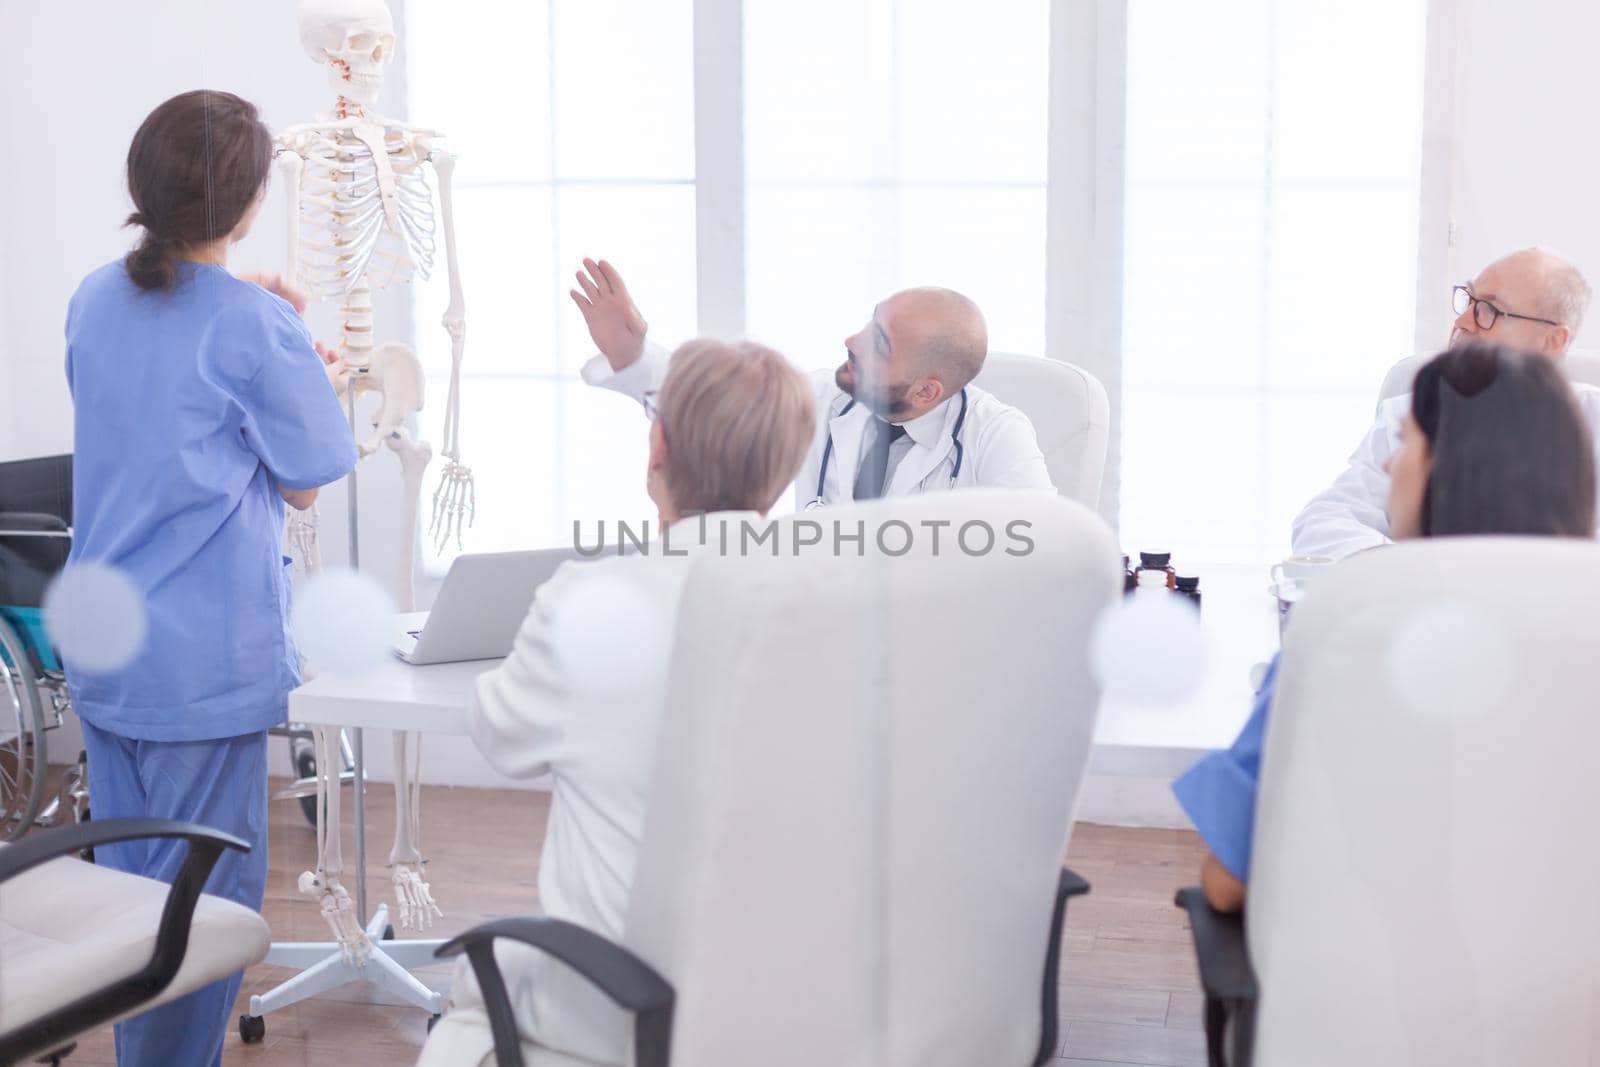 Expert doctor in radiology pointing at human skeleton during presentation in hospital conference room. Clinic therapist talking with colleagues about disease, medicine professional.